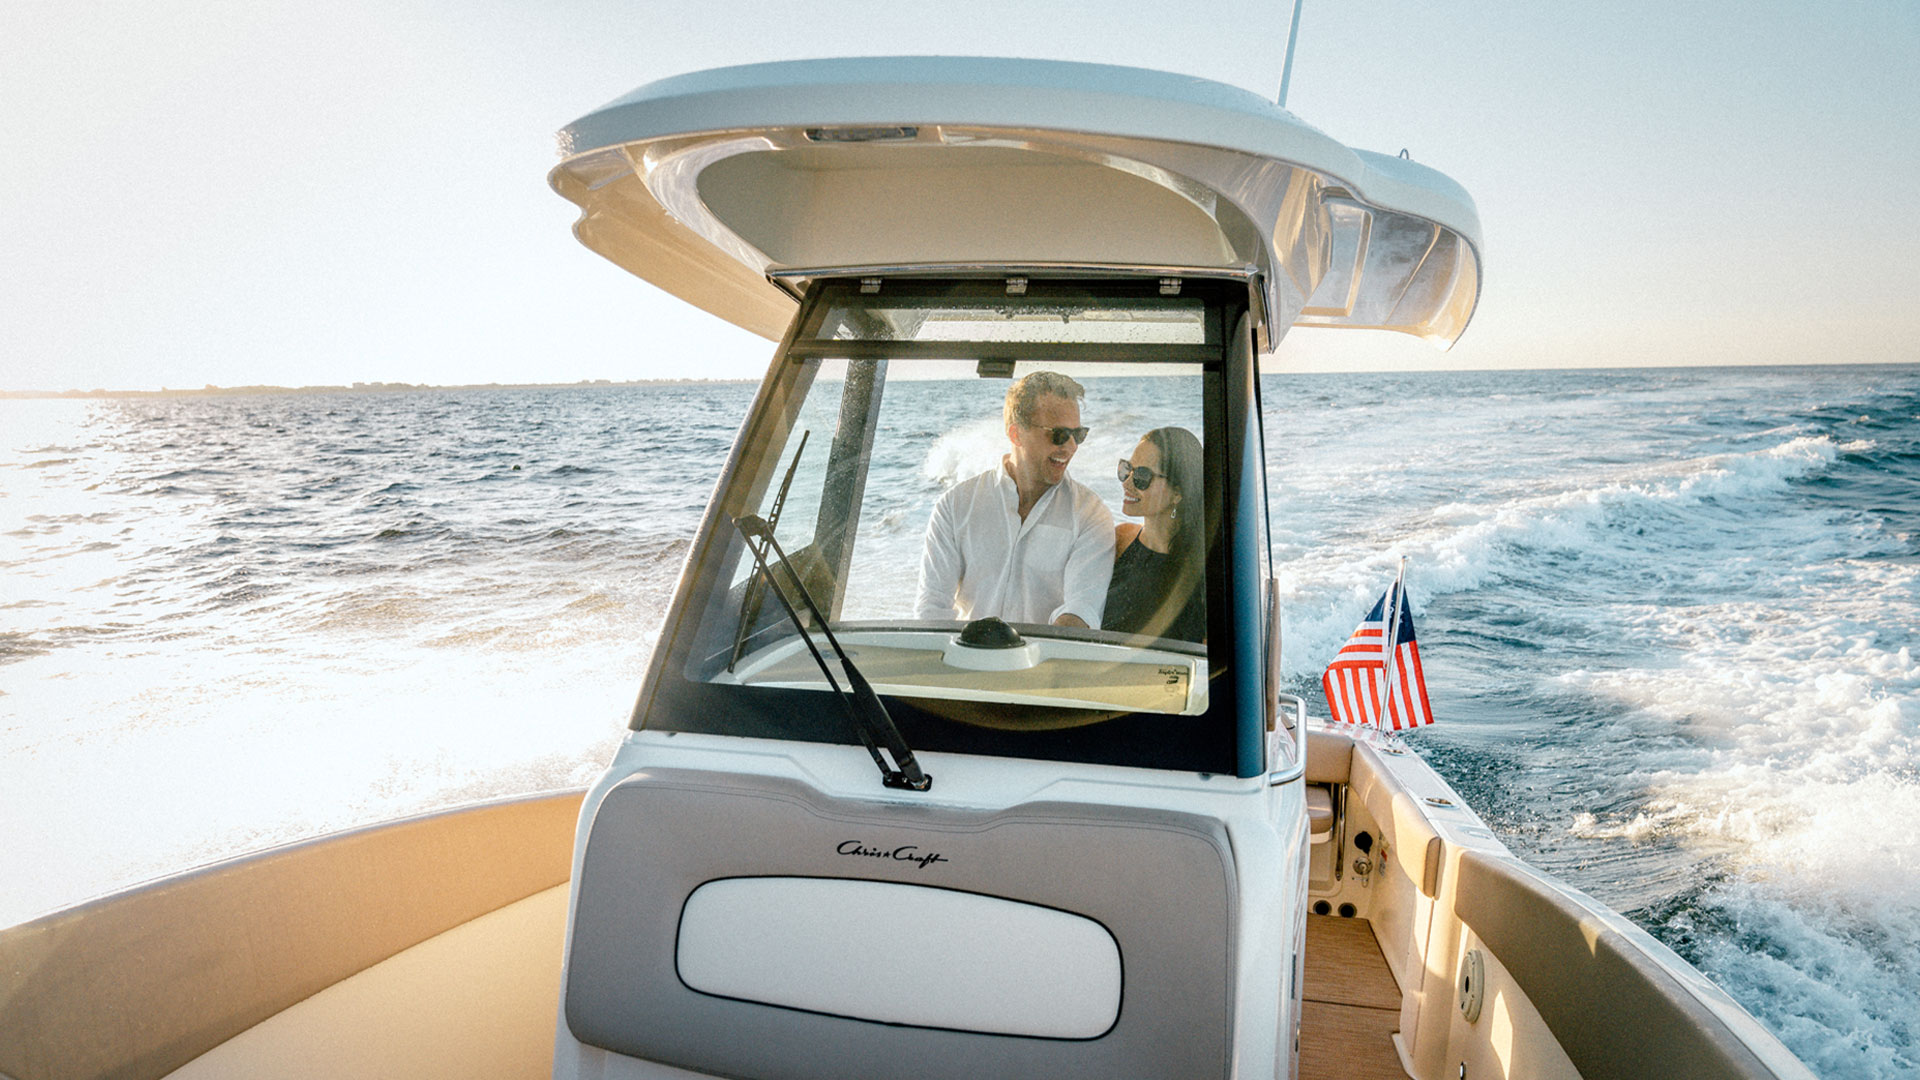 Why Center Console Boats?